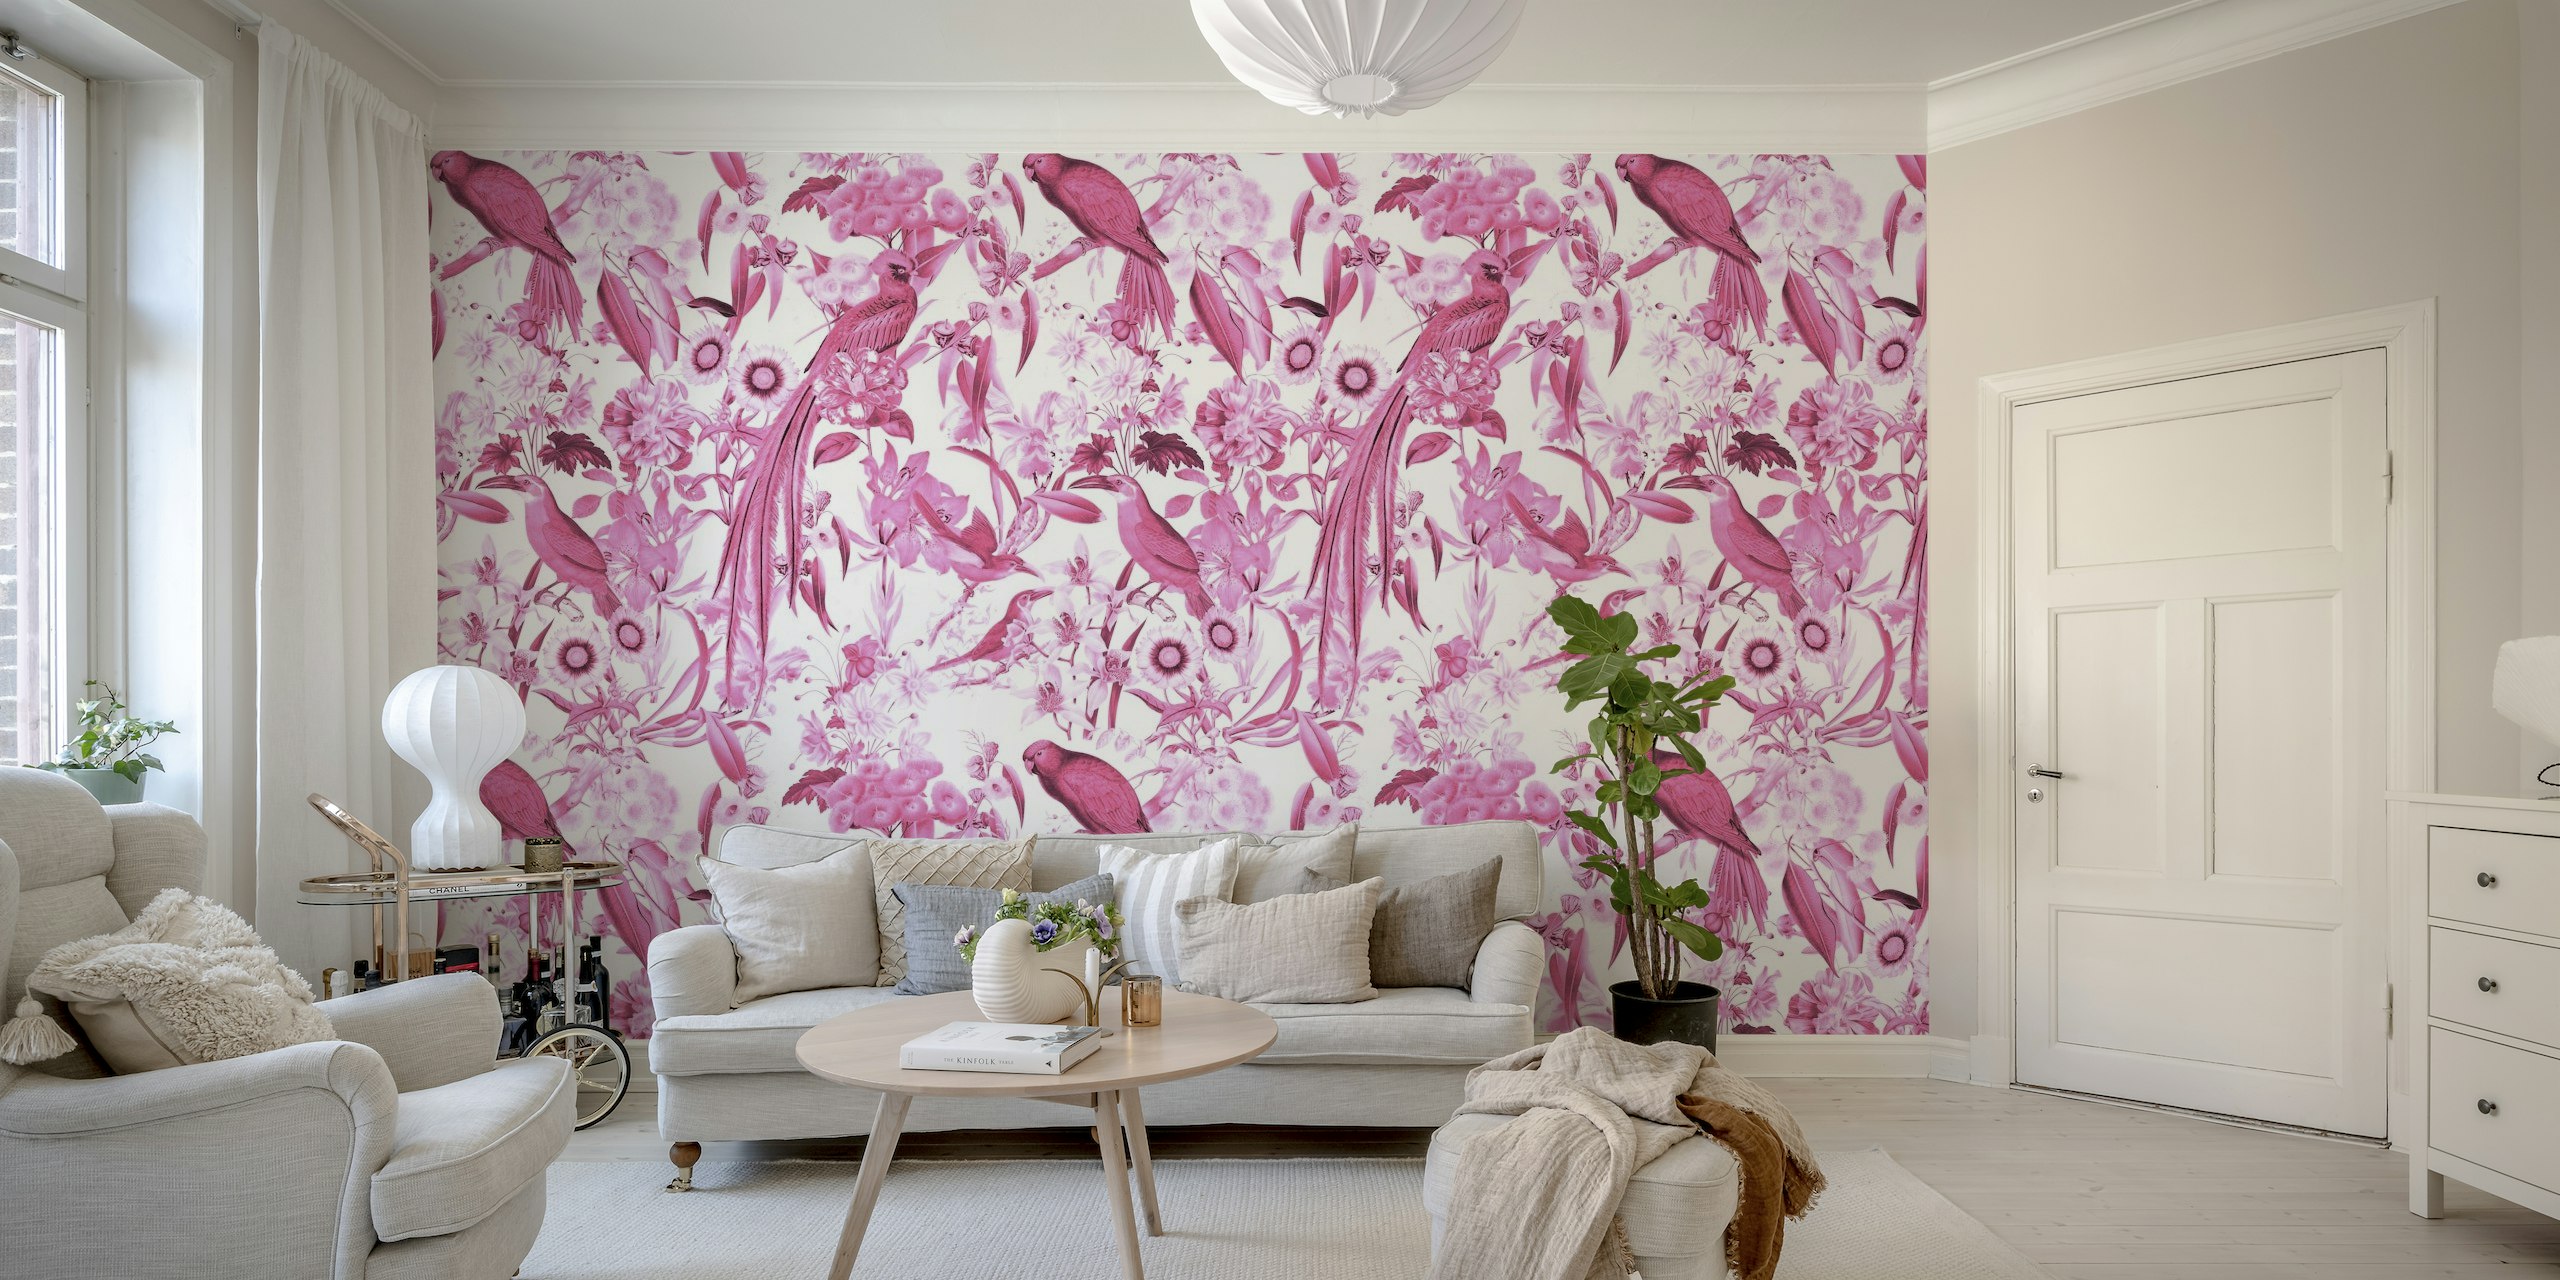 Delia Silvae wall mural with pink tropical birds and flora